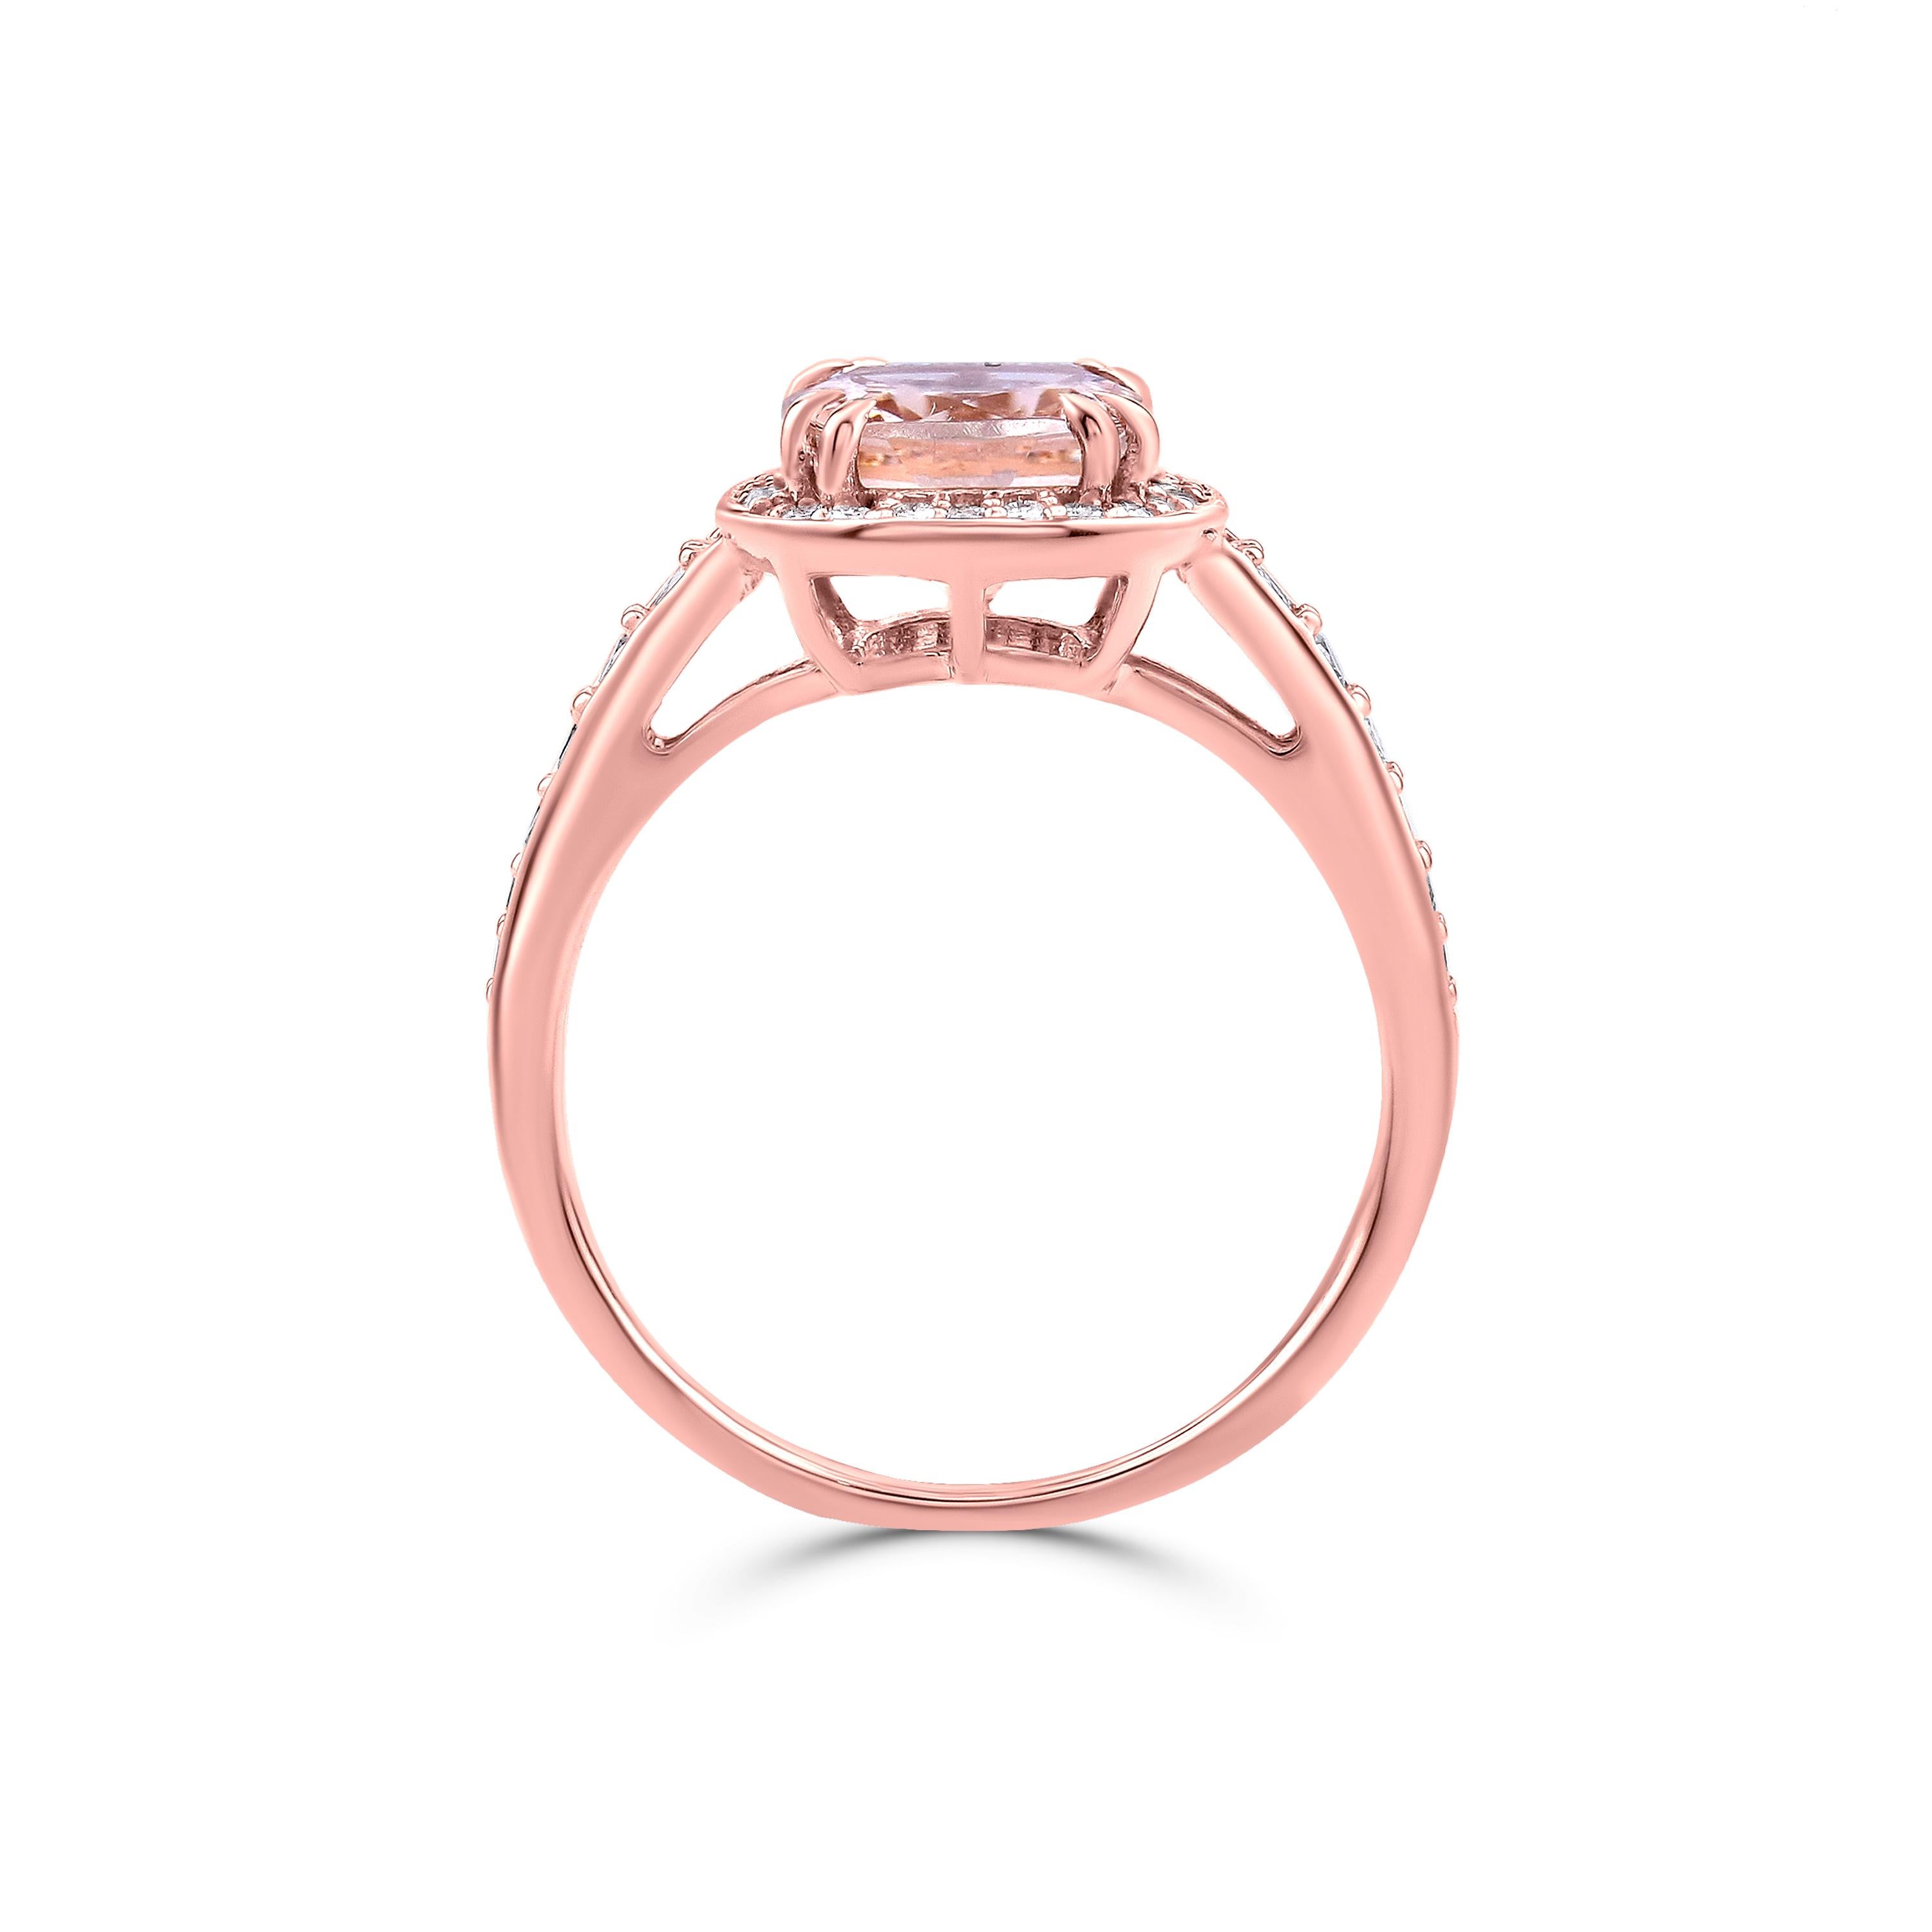 Gemistry 1.4 Carat Cushion Morganite Halo Solitaire Diamond Ring in 14K Gold In New Condition For Sale In New York, NY